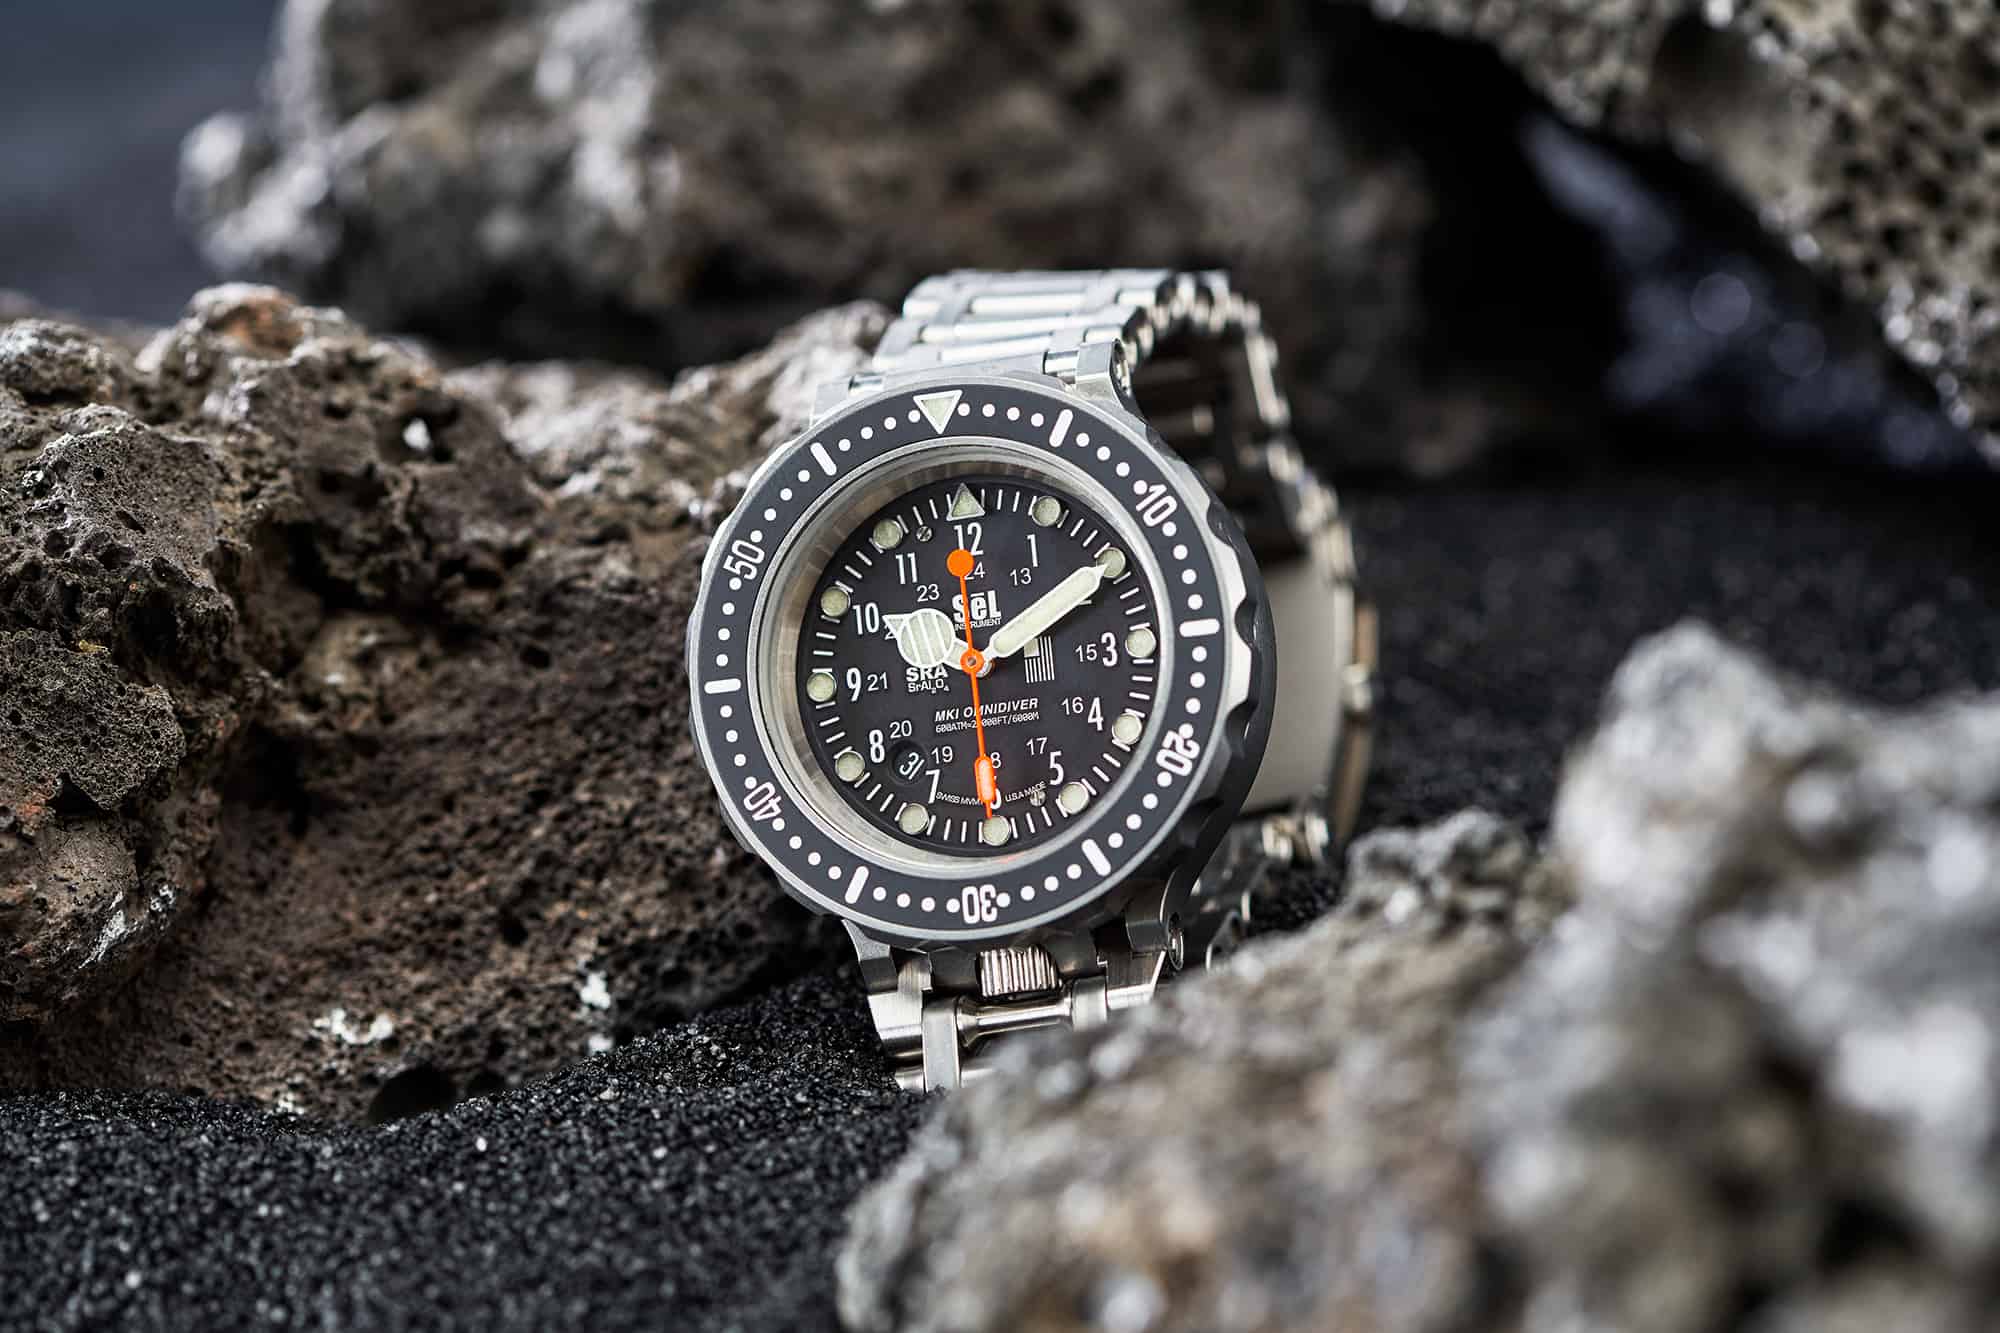 S?L Instruments and their Bombproof Watches